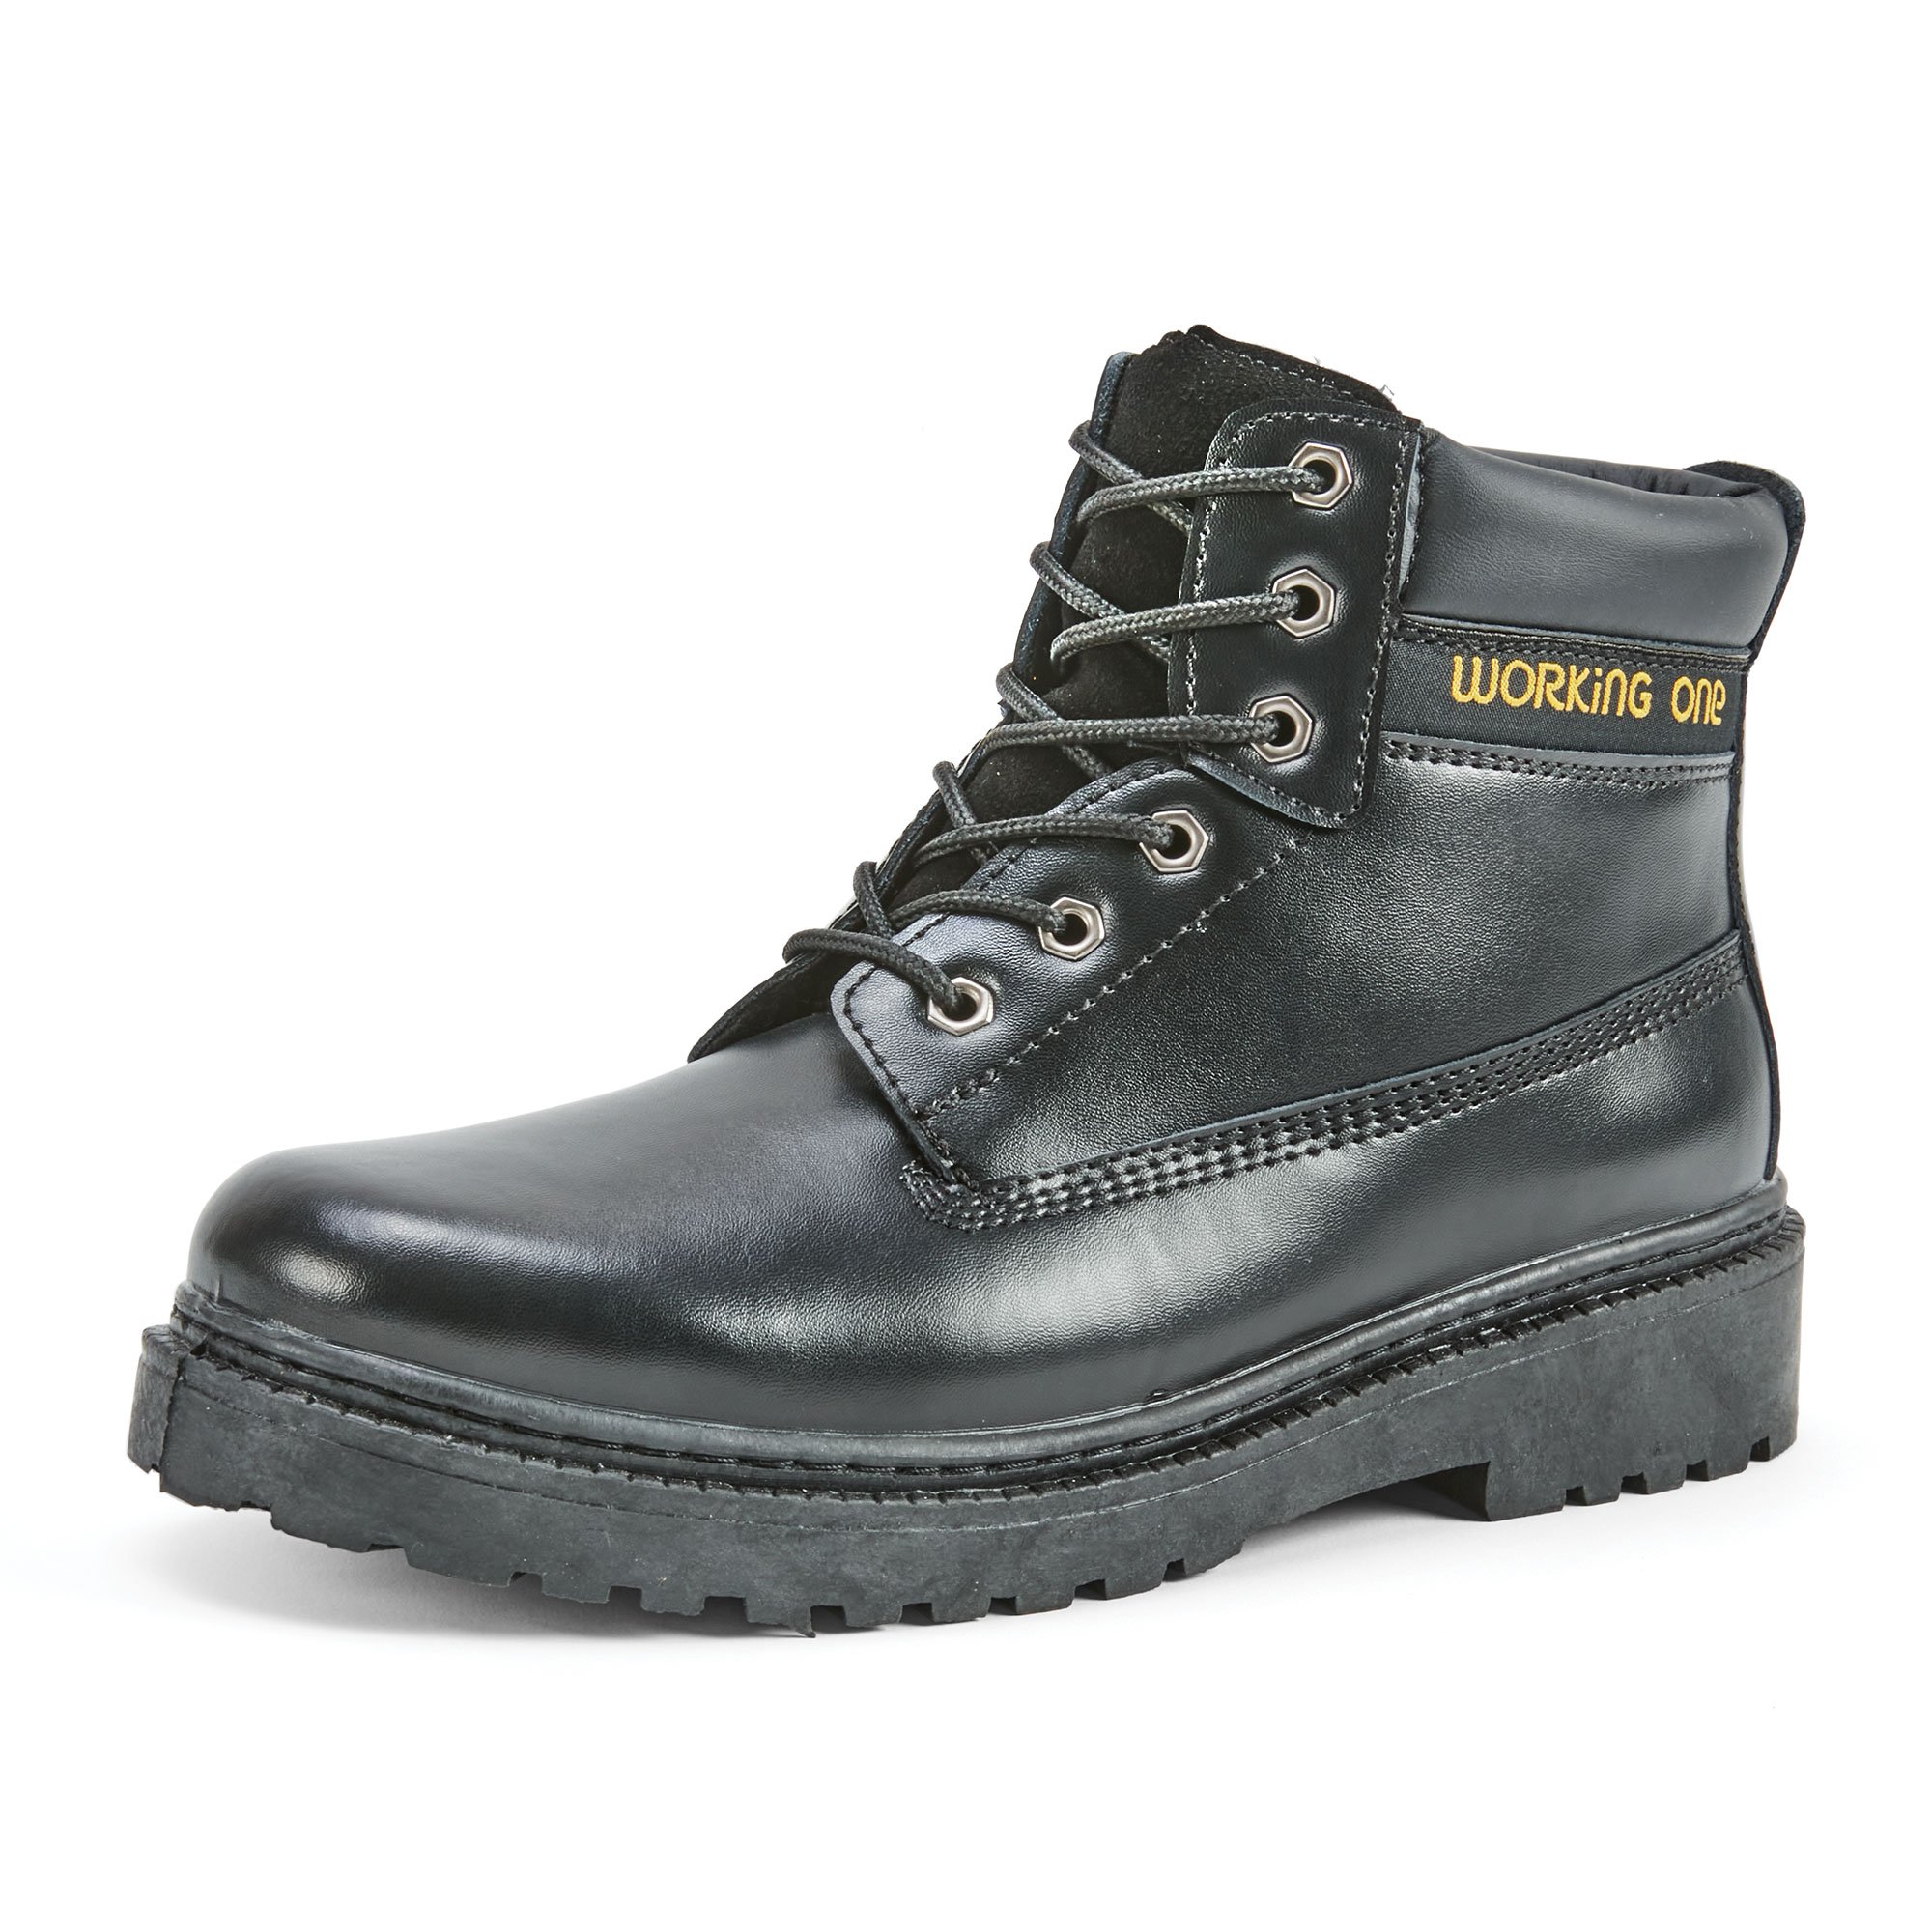 Working One Leather Work Boots - Black